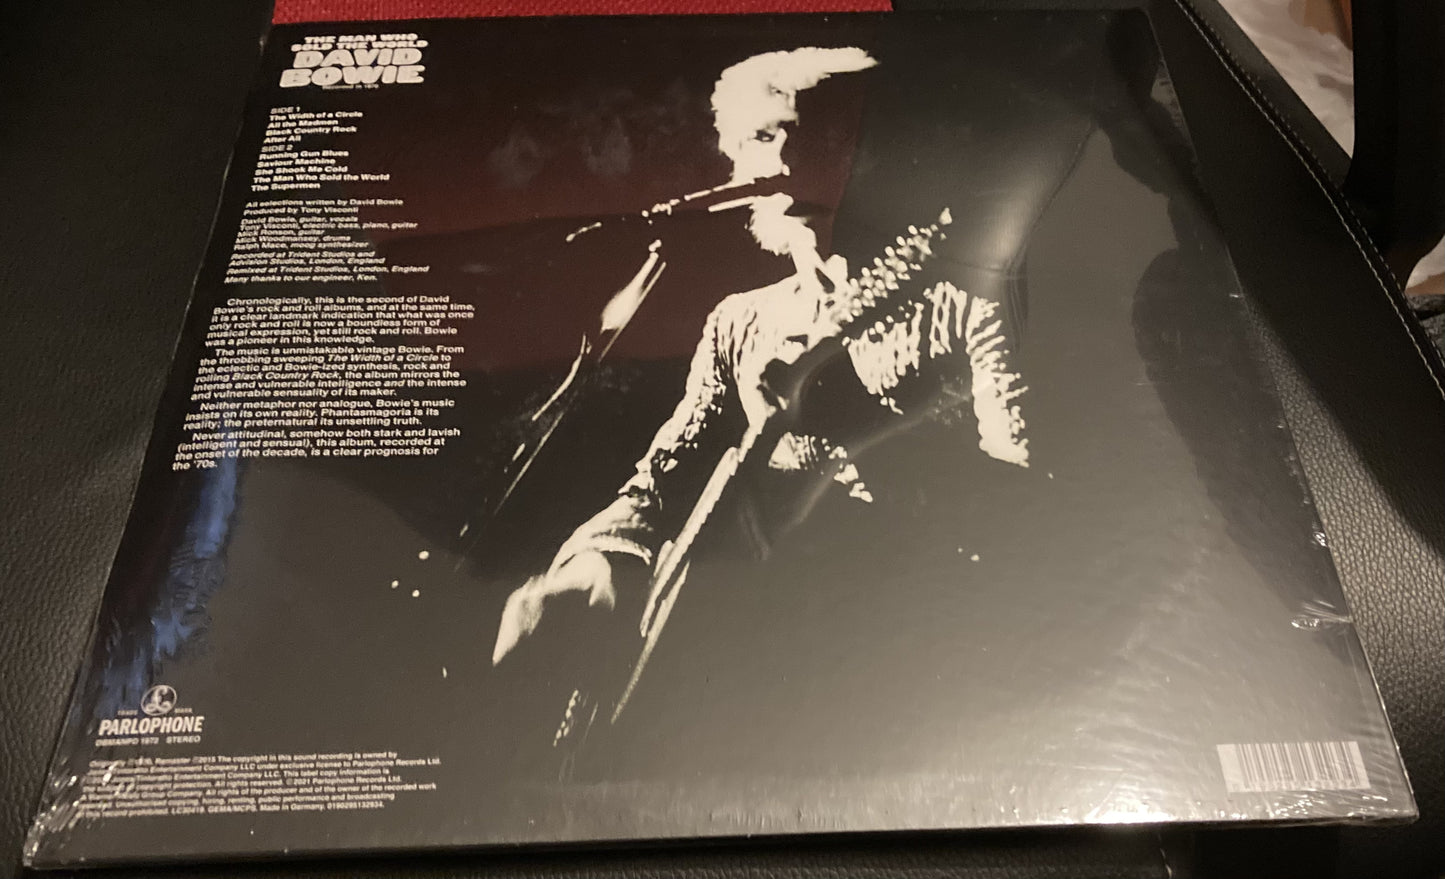 The back of 'David Bowie - The Man Who Sold the World' on vinyl